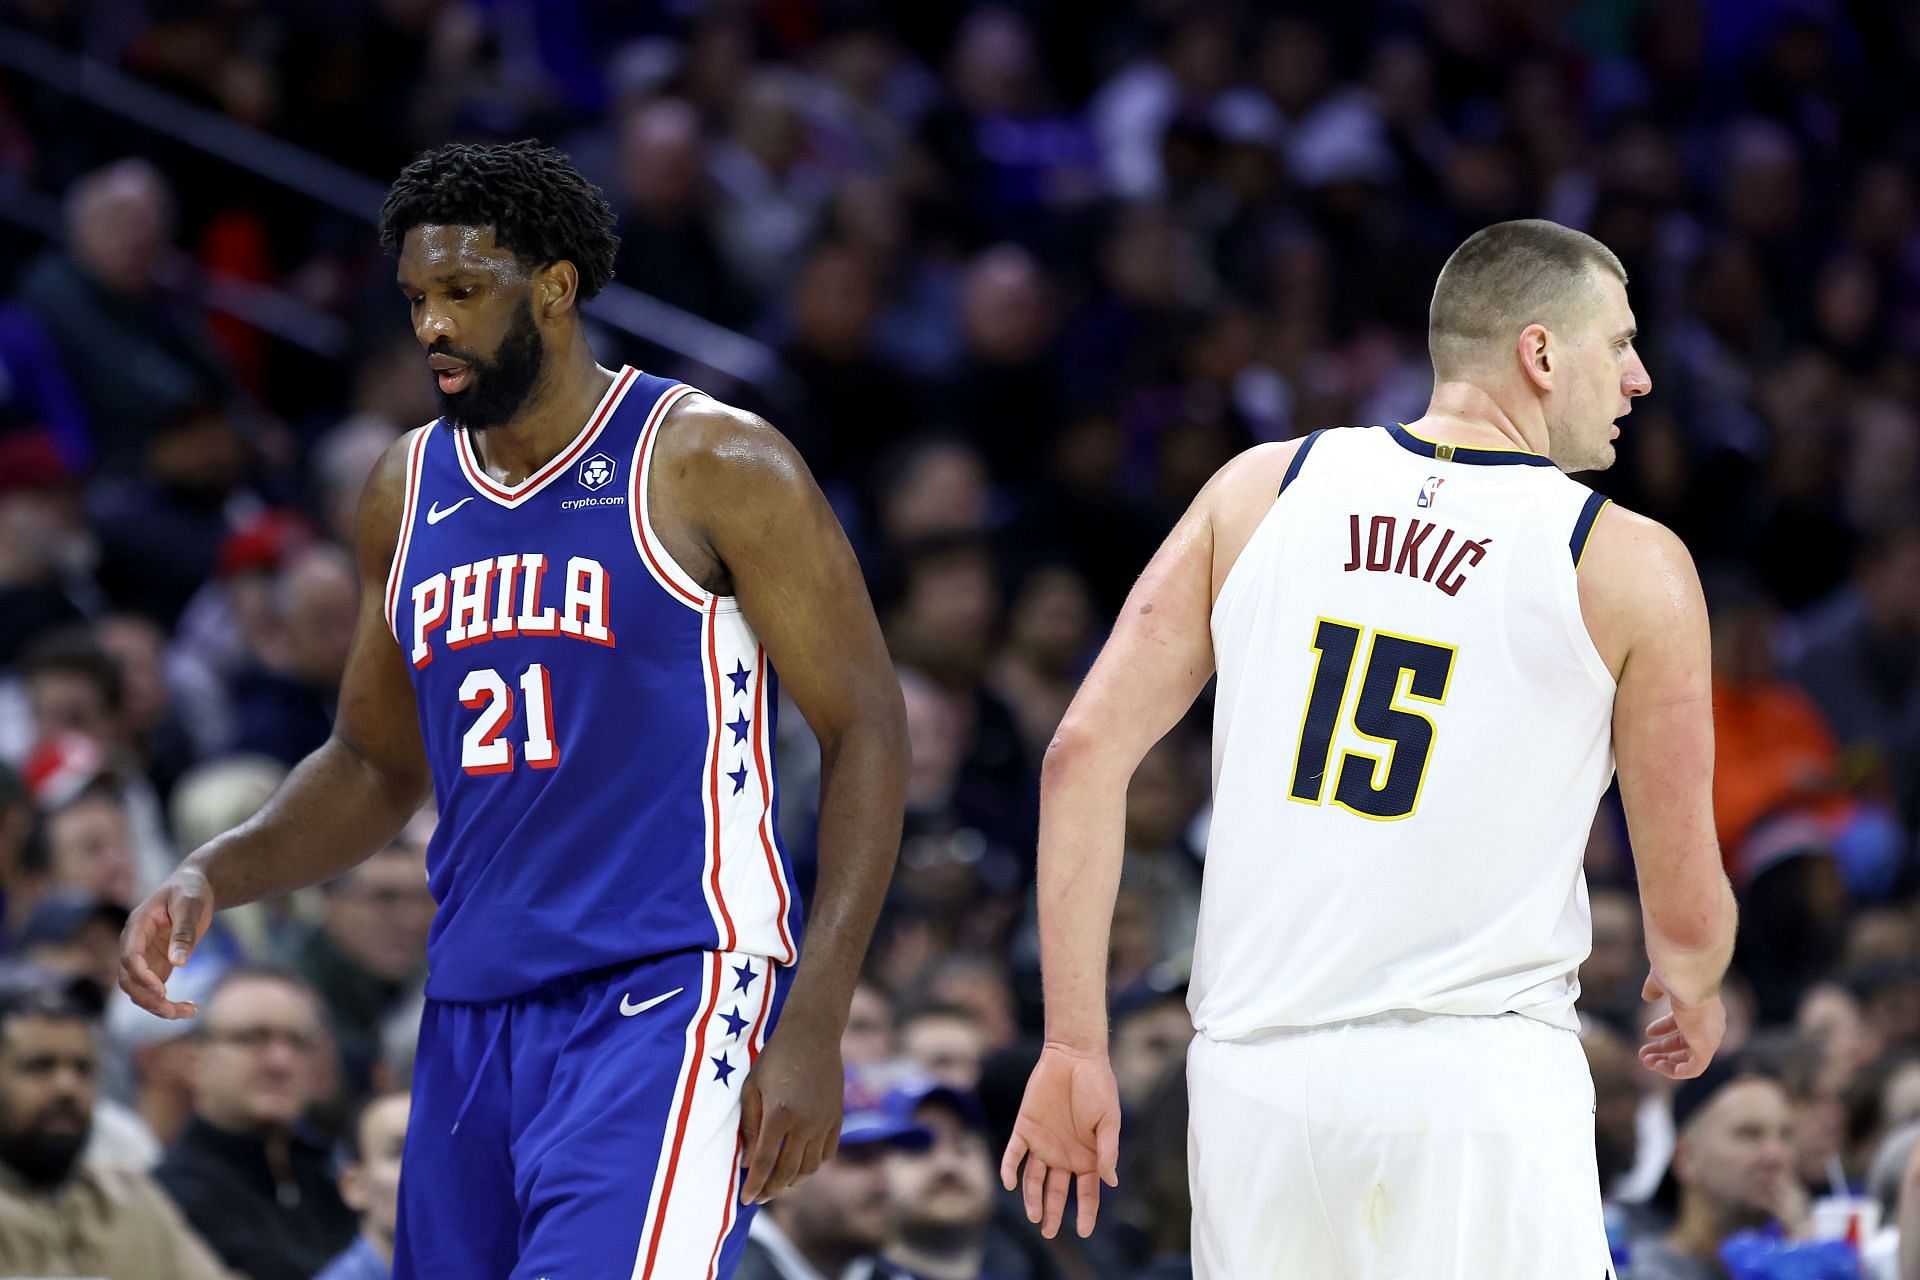 Joel Embiid and Nikola Jokic to face each other again in less than two weeks.